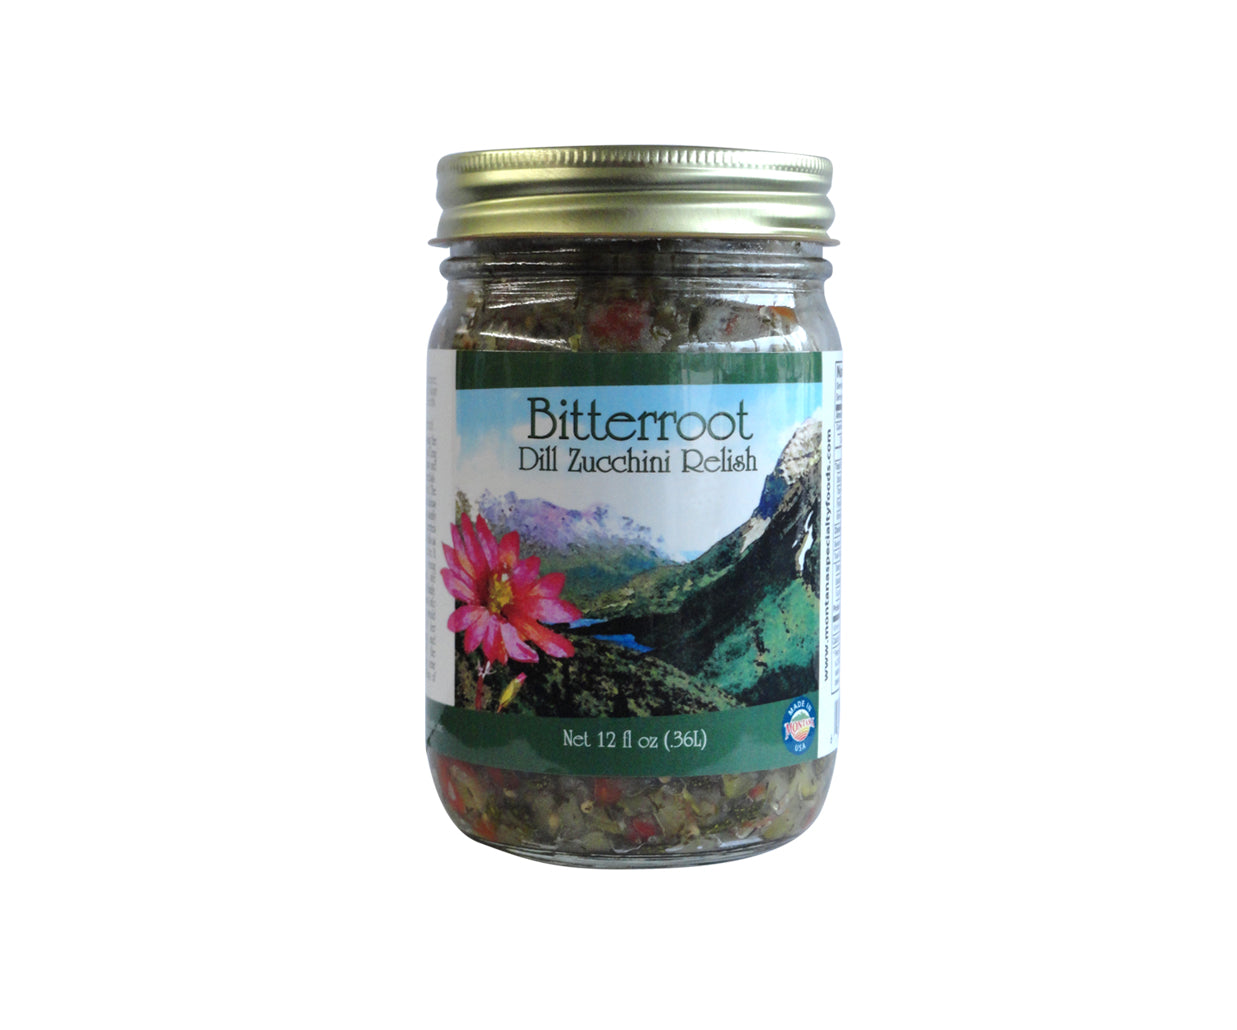 GIFT PACKAGE SWEET WITH A LITTLE HEAT, SWEET and DILL ZUCCHINI RELISH